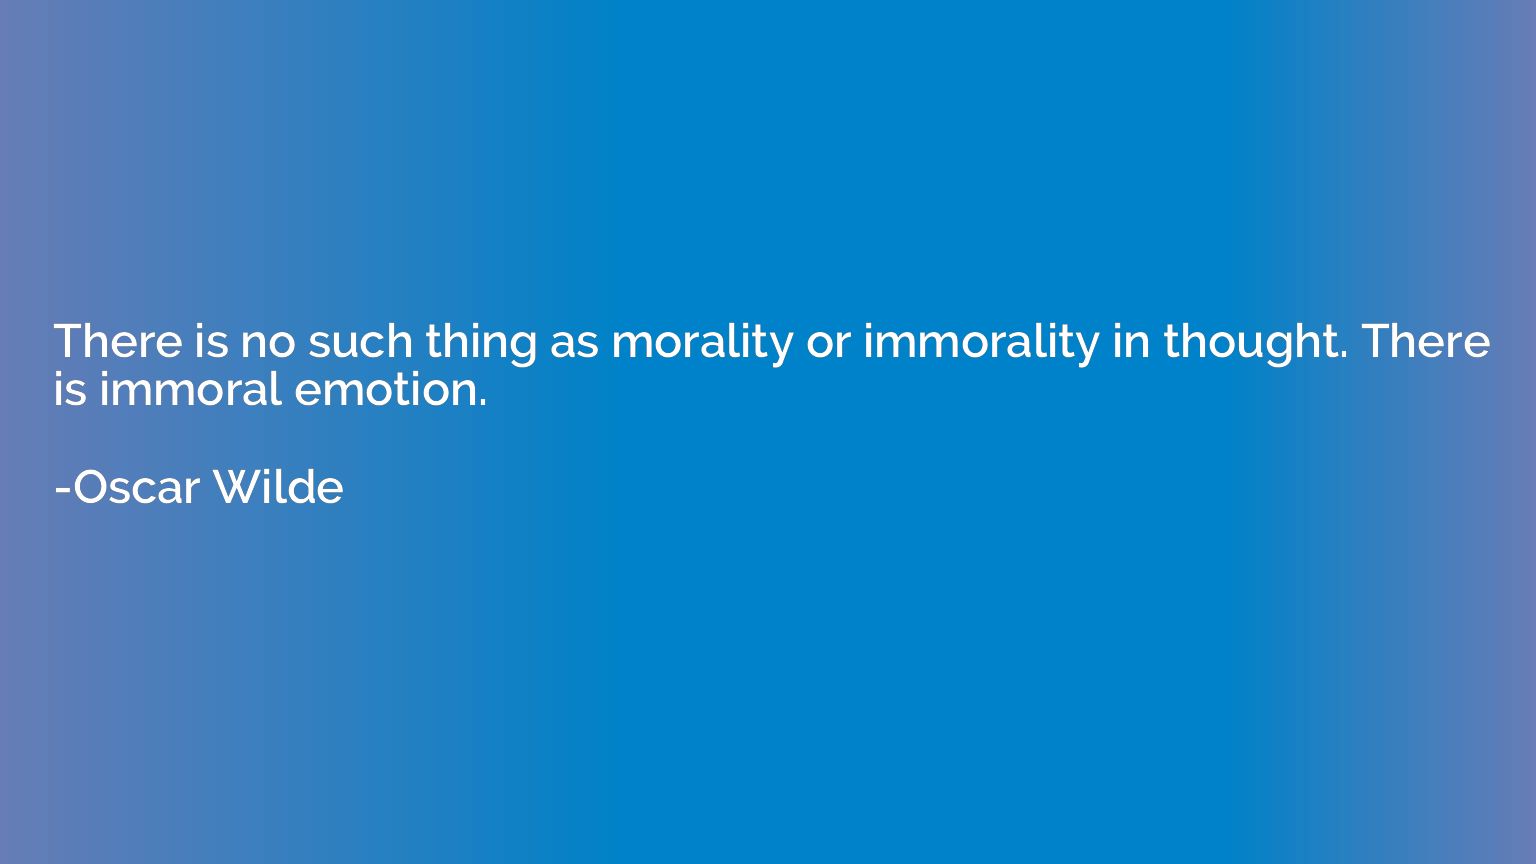 There is no such thing as morality or immorality in thought.